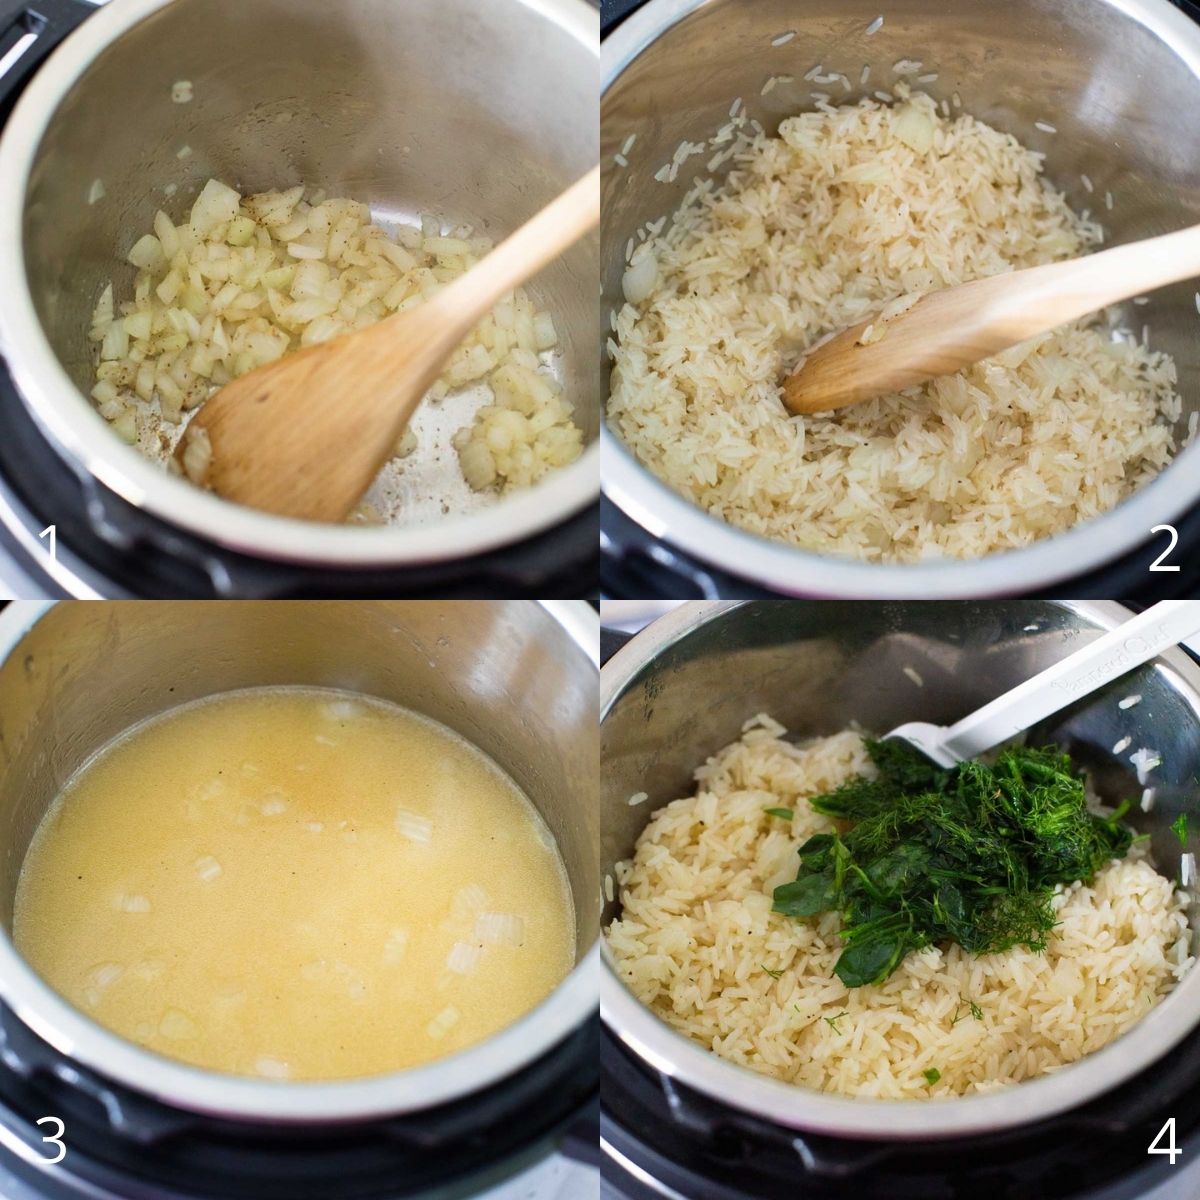 Step by step photos show how to make the rice in the Instant Pot. 